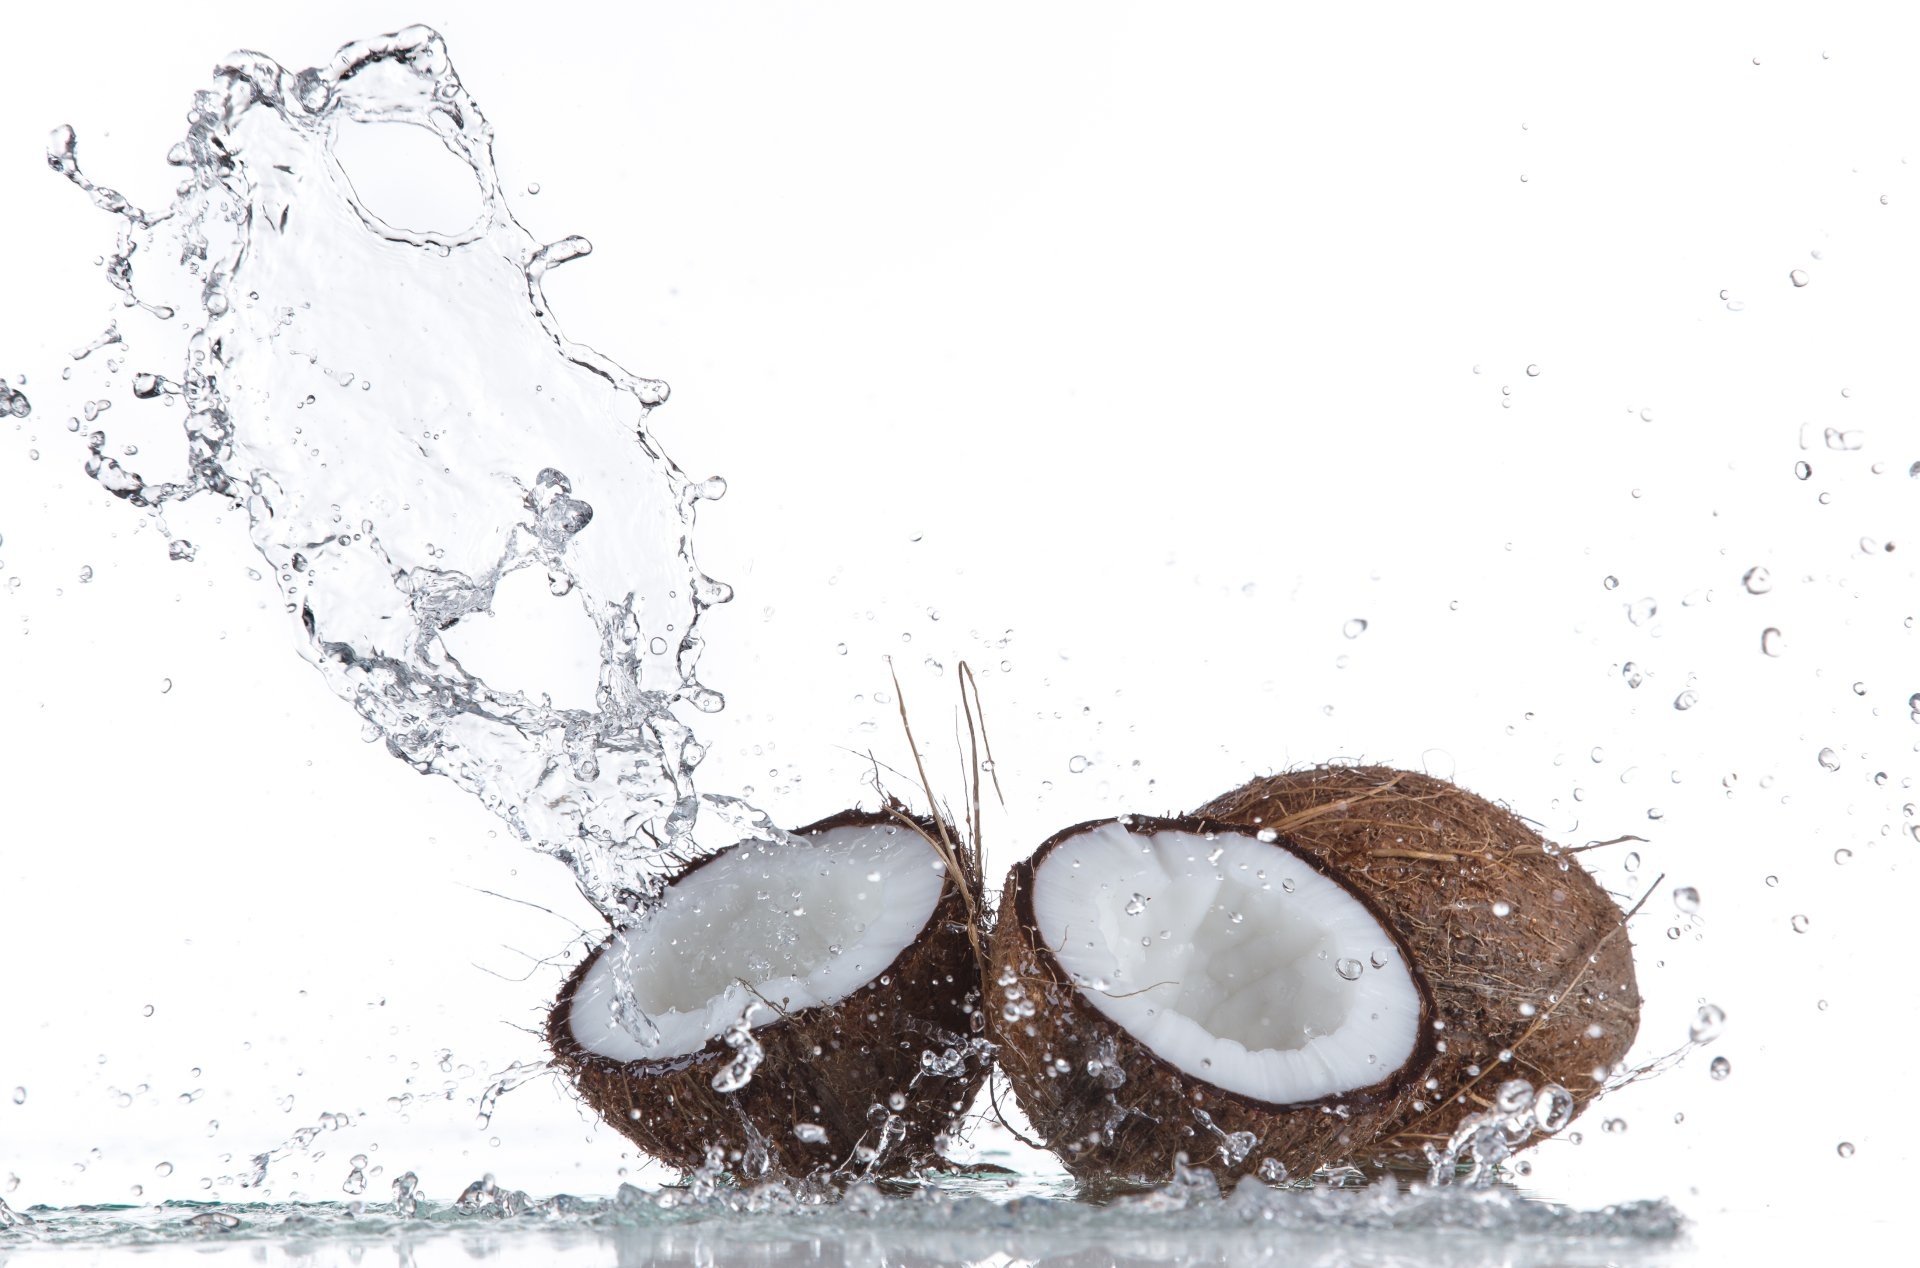 Coconut: The ingredient of many different recipes for ice creams, sorbets, smoothies, and cocktails. 1920x1270 HD Wallpaper.